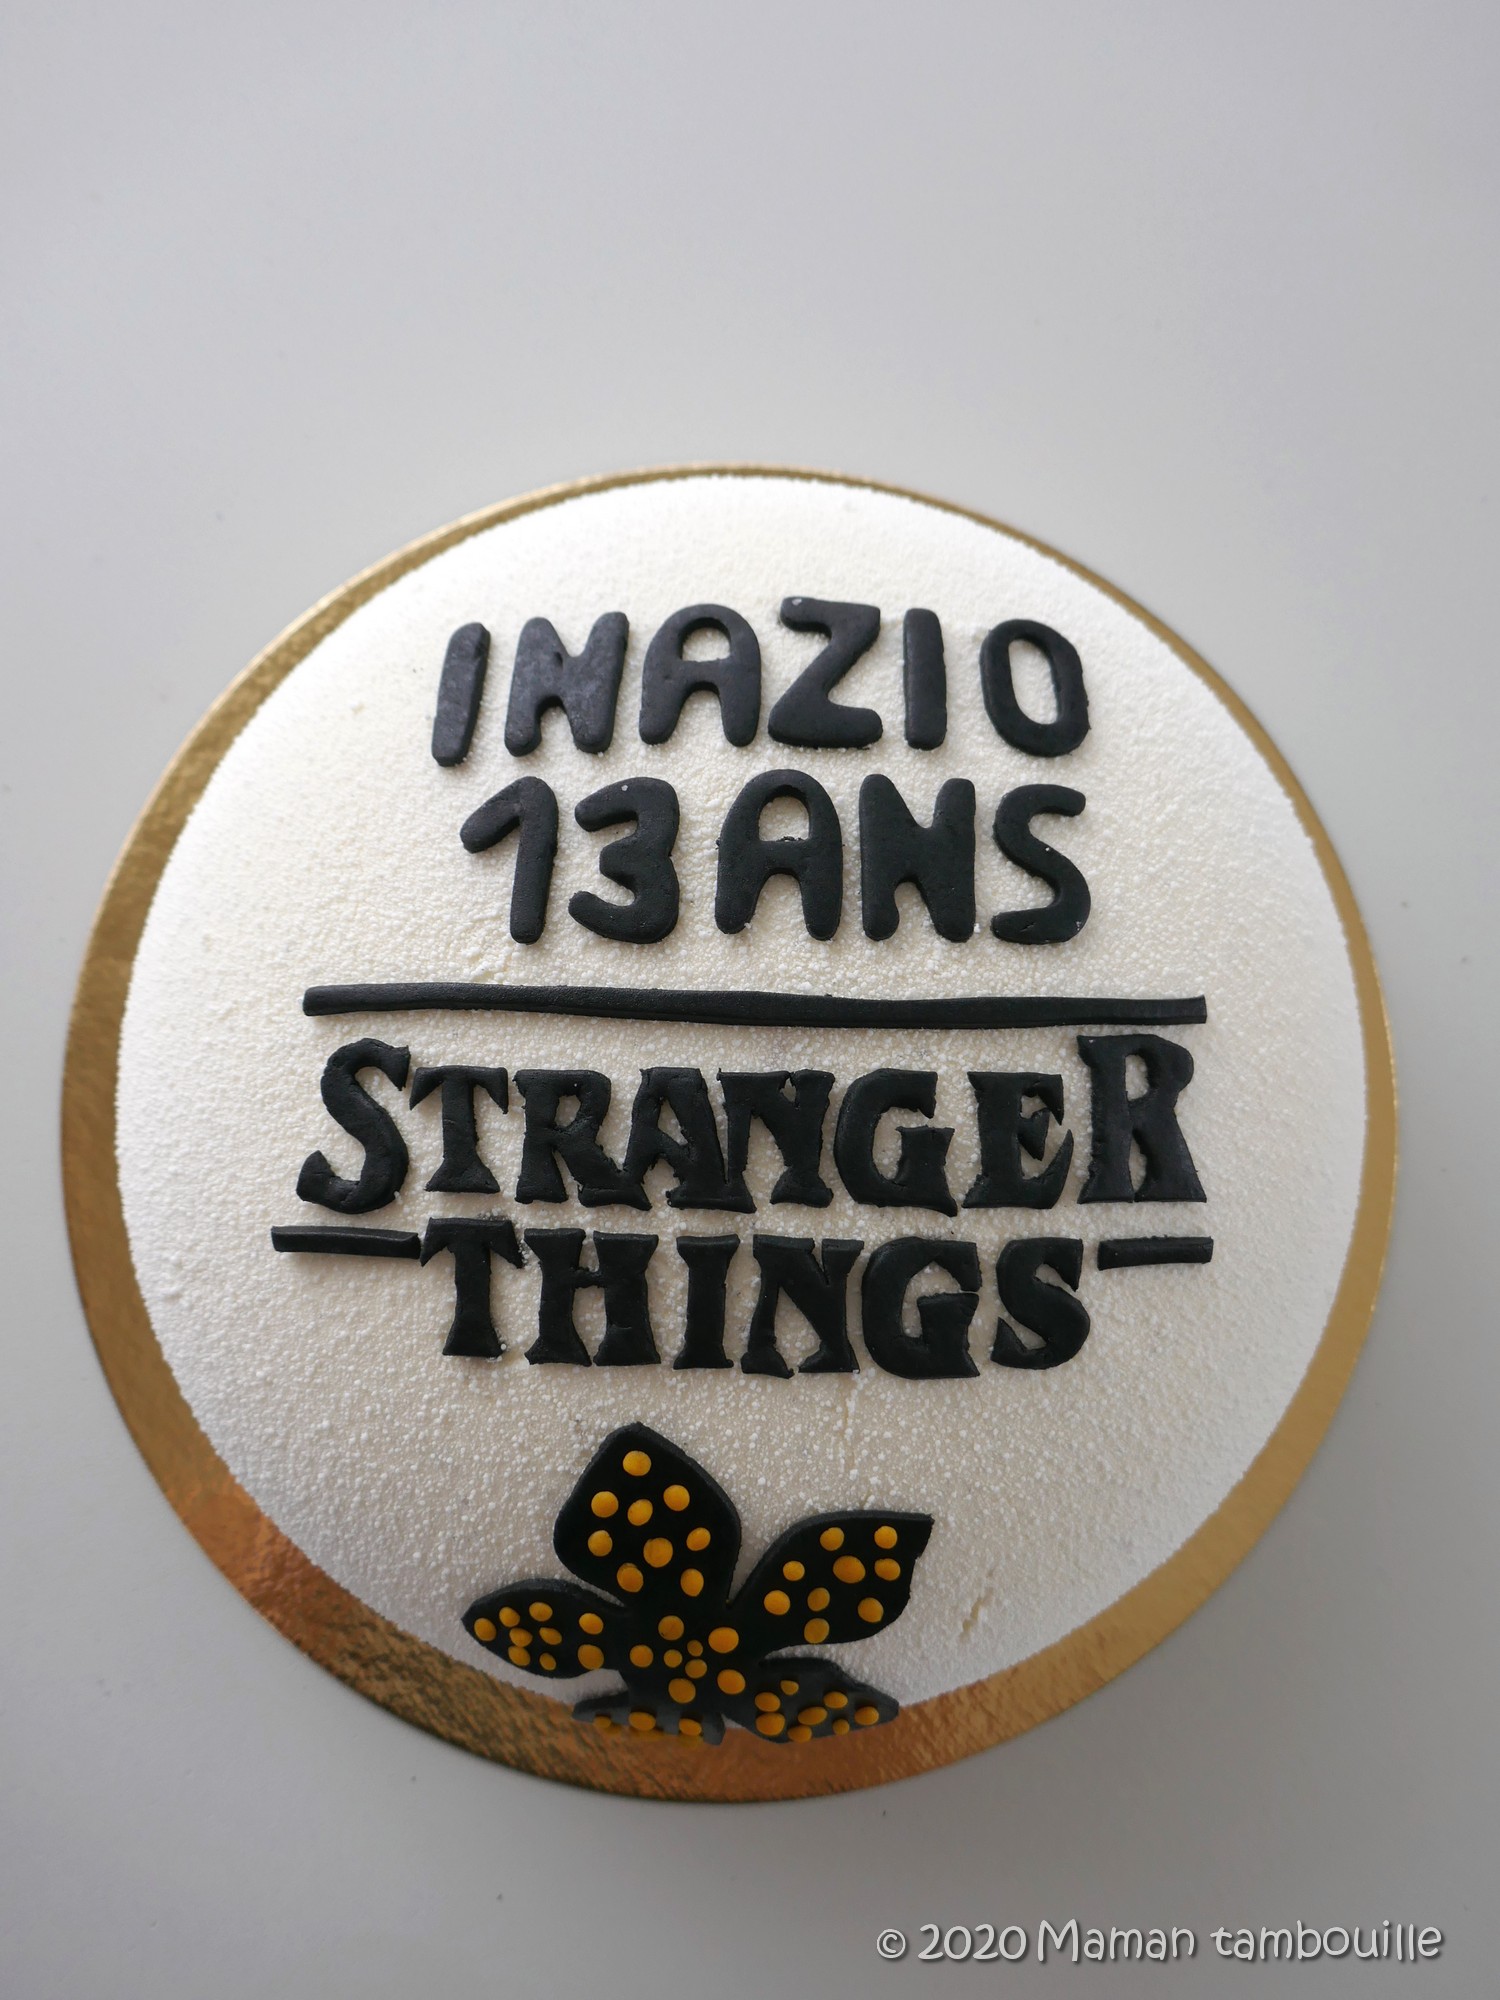 You are currently viewing Entremets fruits rouges vanille {Stranger Things}